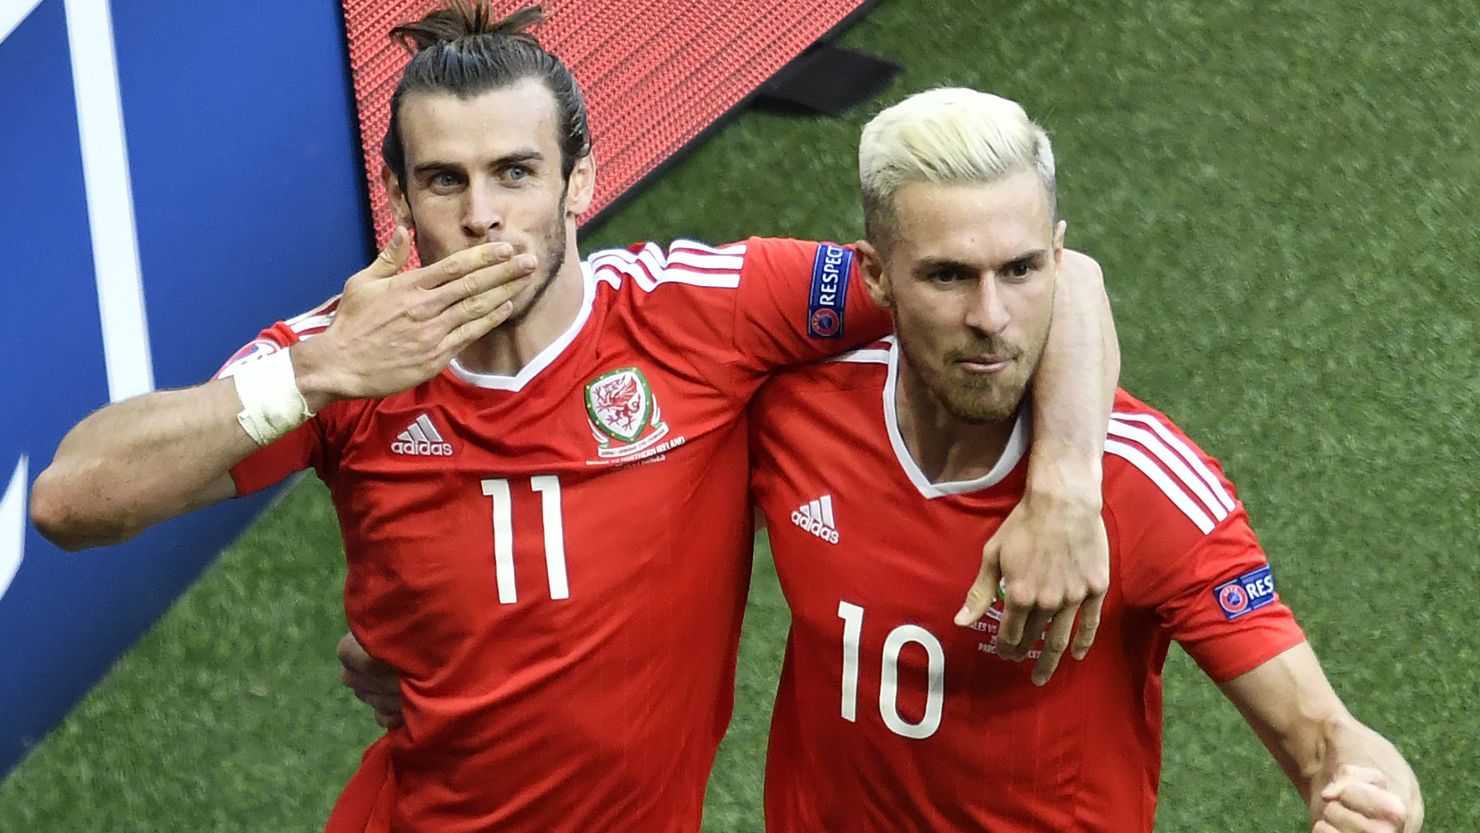 Gareth Bale (left) and midfielder Aaron Ramsey celebrate after an own goal by Northern Ireland's defender Gareth McAuley put their side ahead at the Parc des Princes.